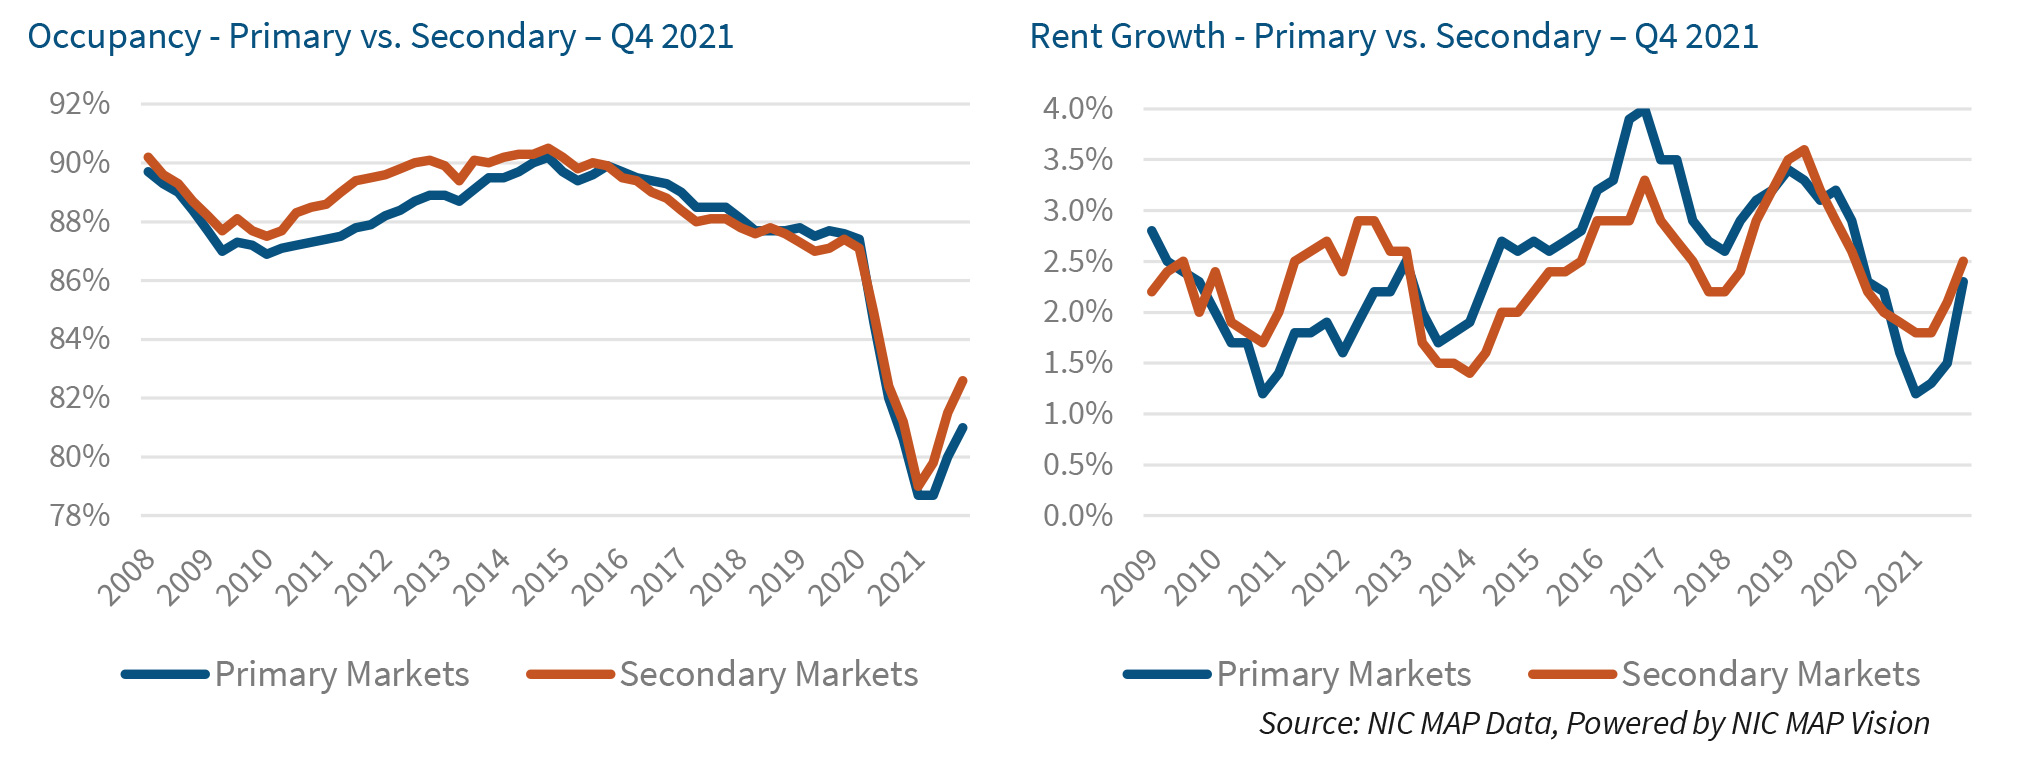 Occupancy - Primary vs. Secondary – Q4 2021 | Rent Growth - Primary vs. Secondary – Q4 2021